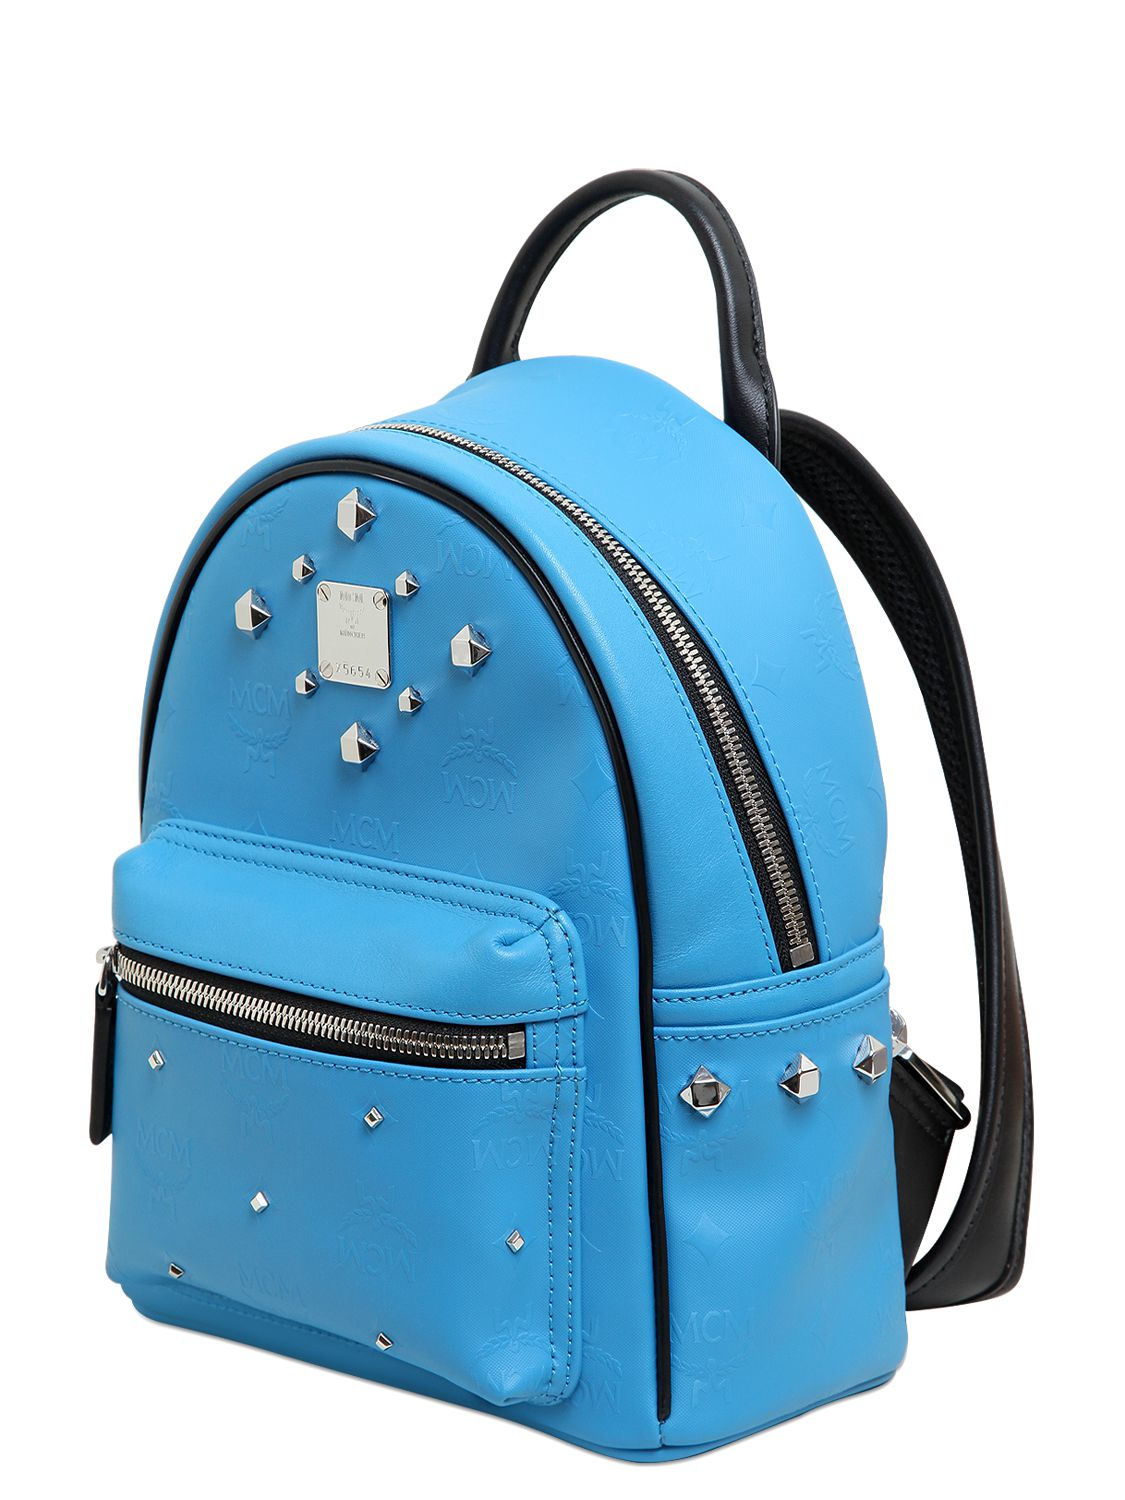 Lyst - Mcm Stark Odeon Embossed Leather Backpack in Blue